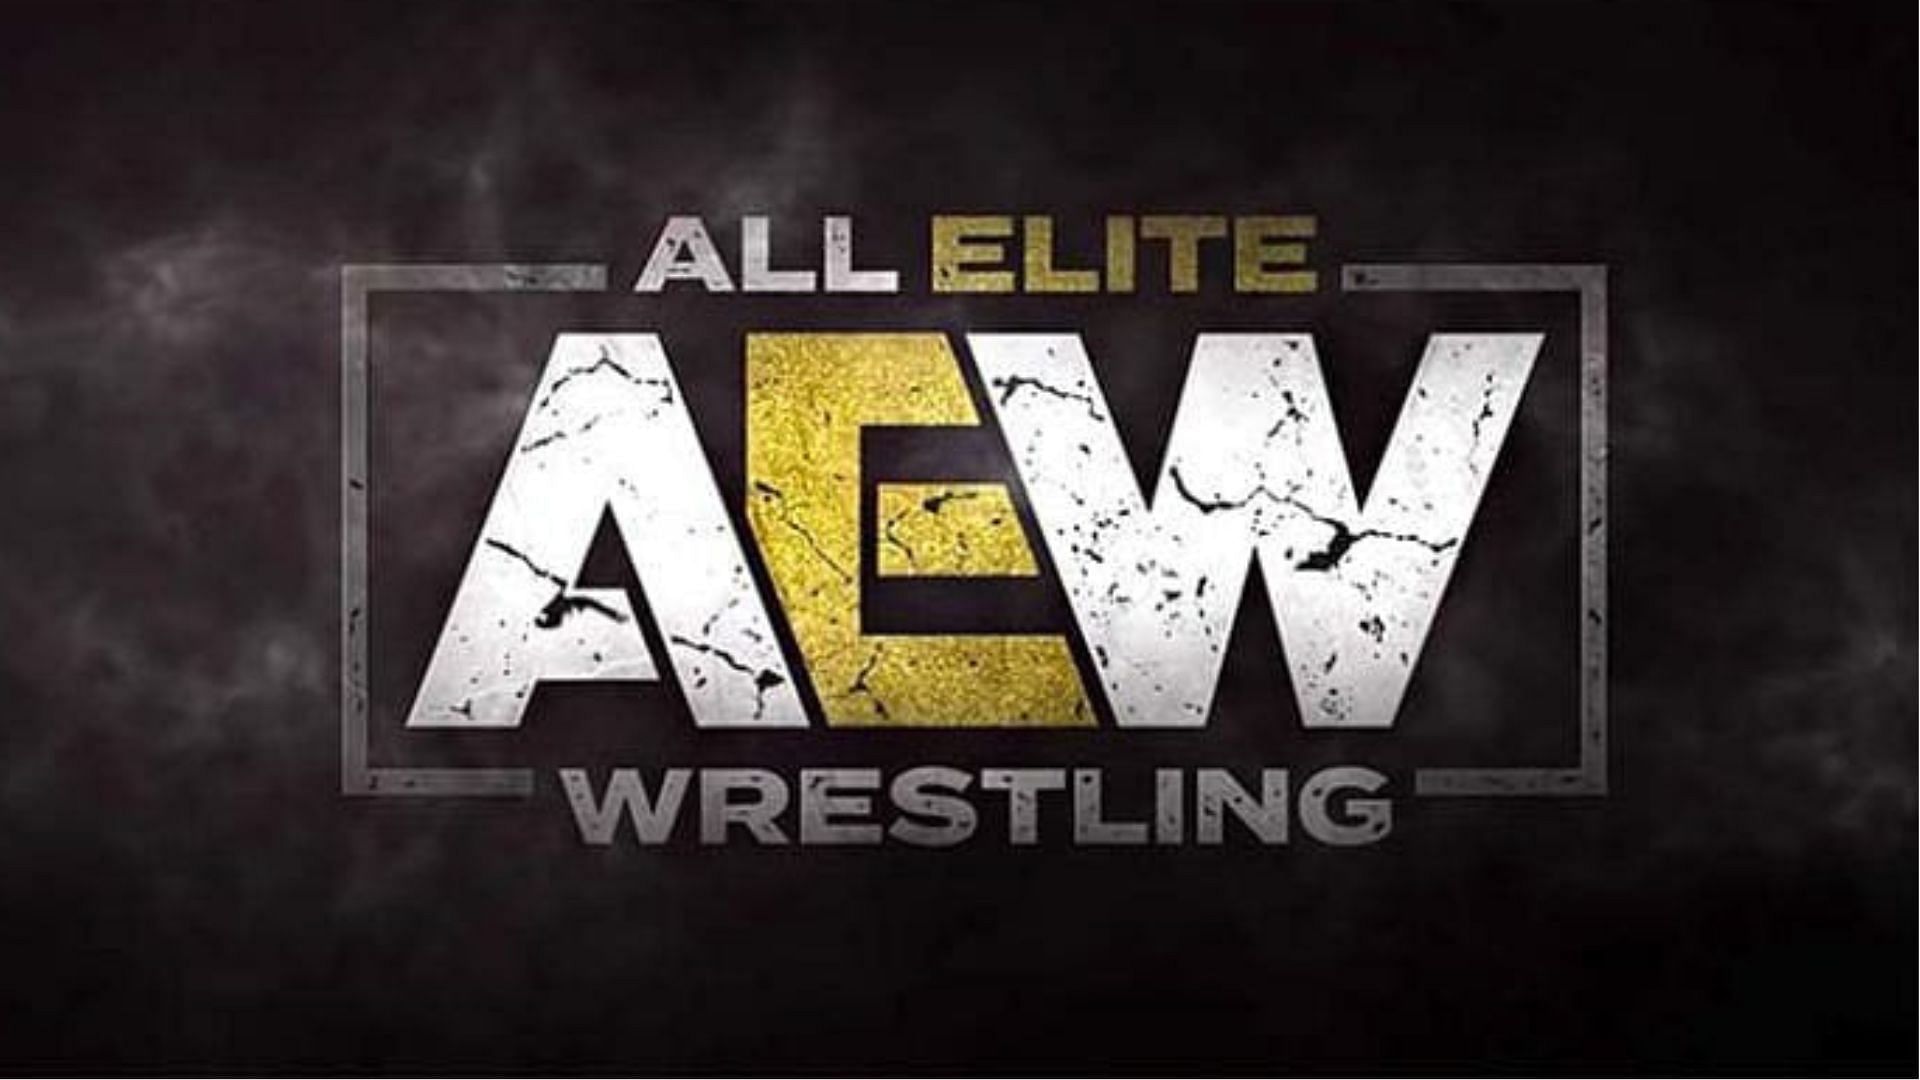 All Out is one of the four major annual events AEW hosts